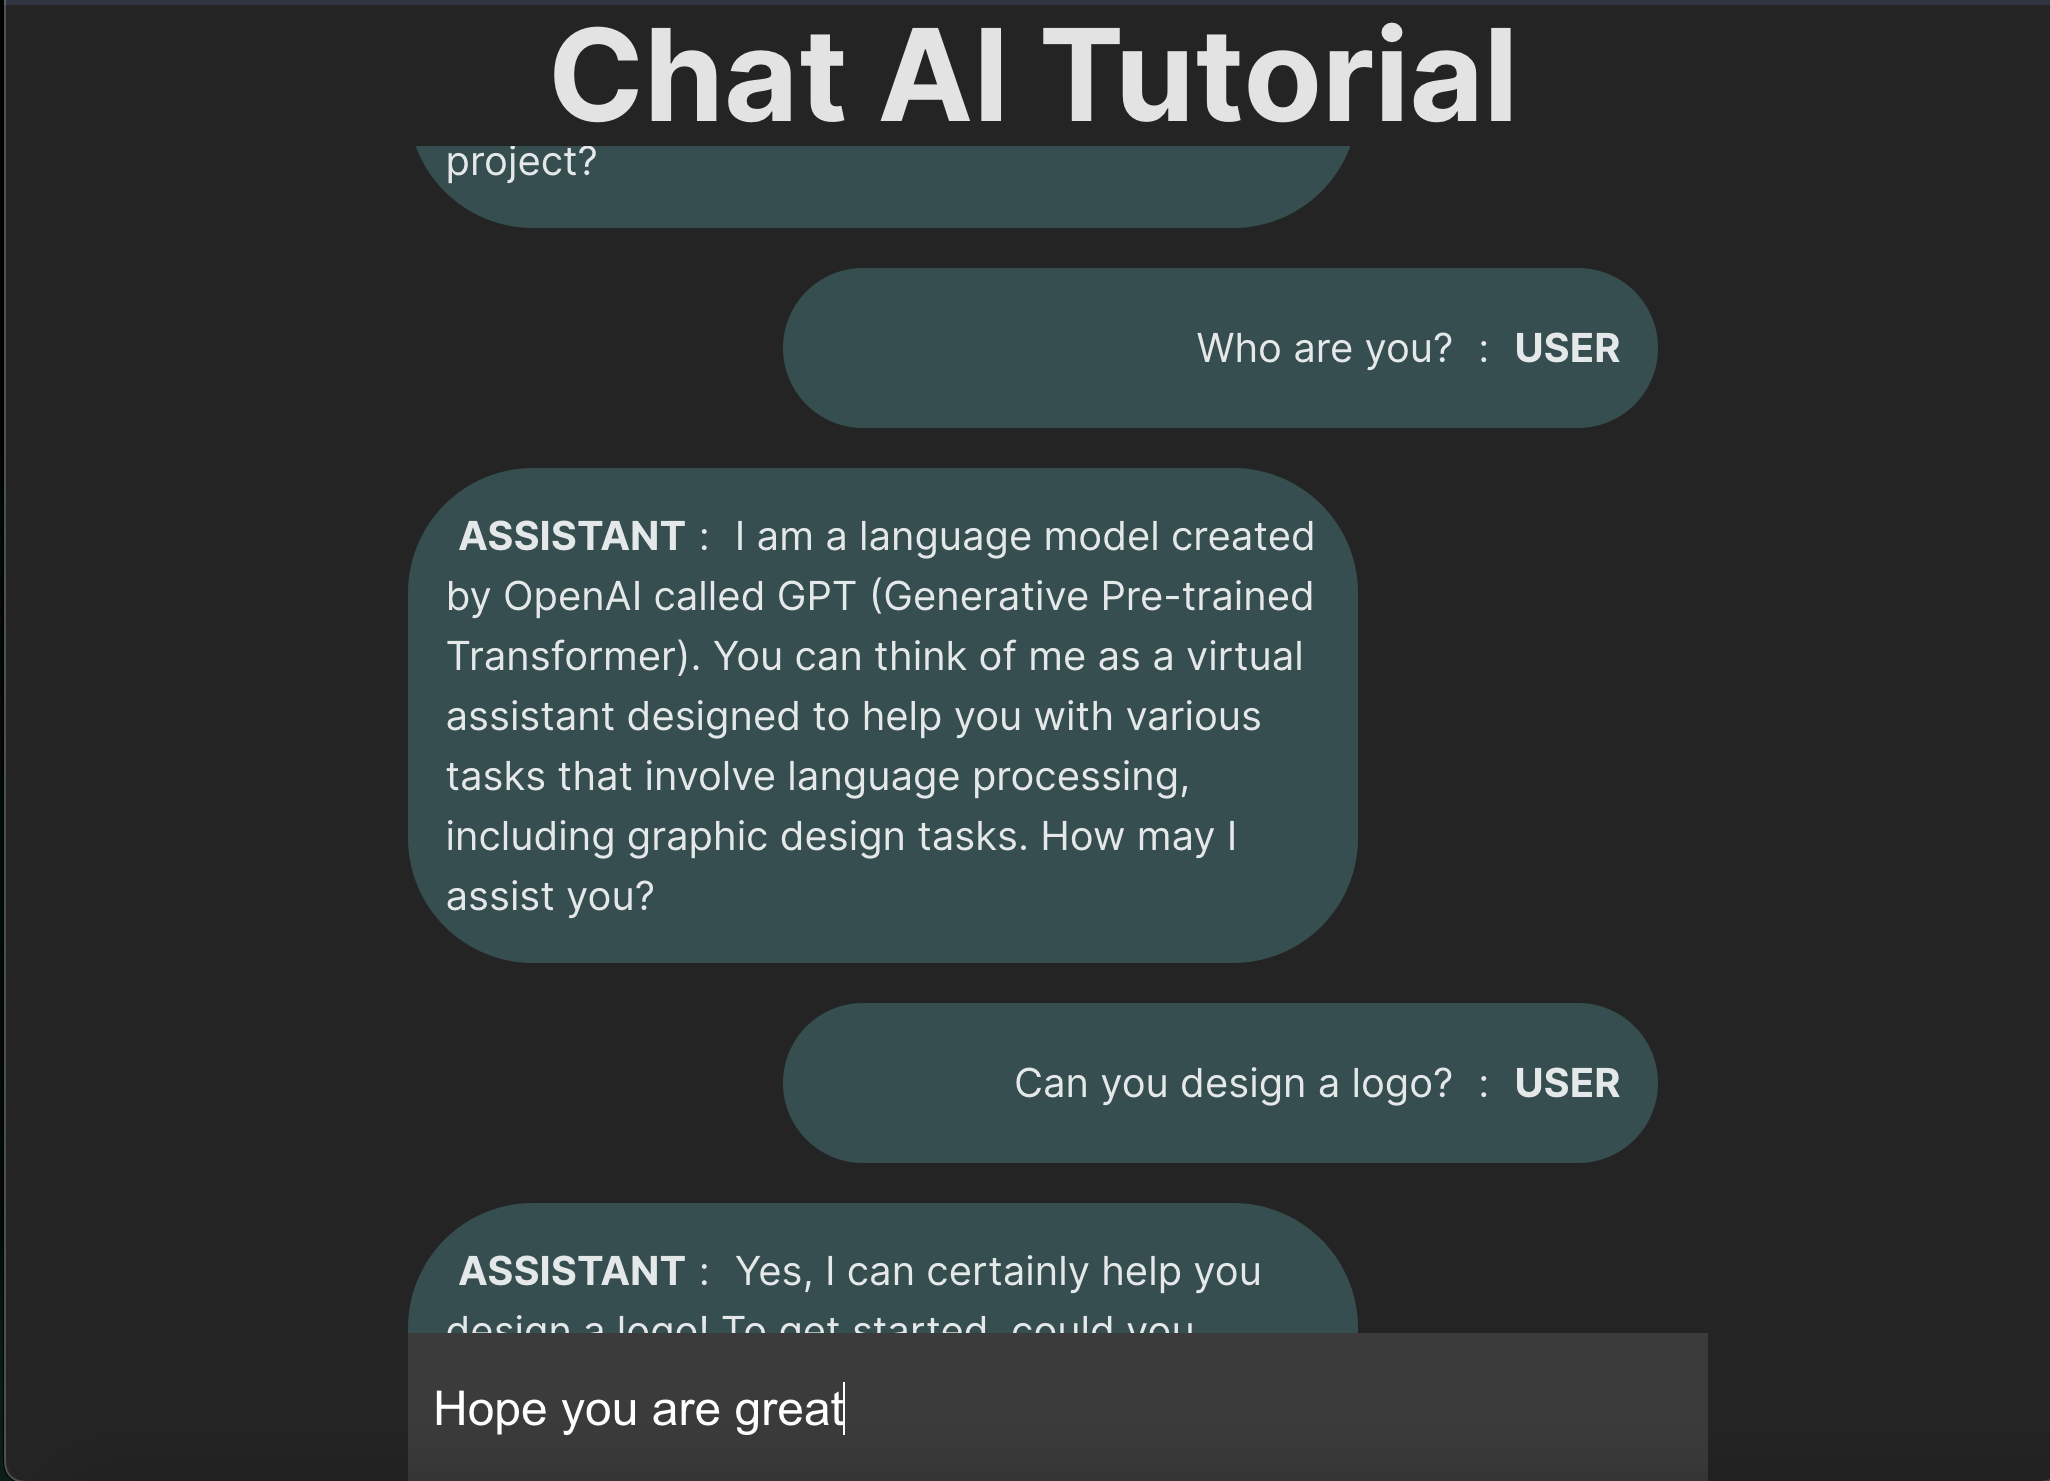 ChatBot Working As Expected with CSS